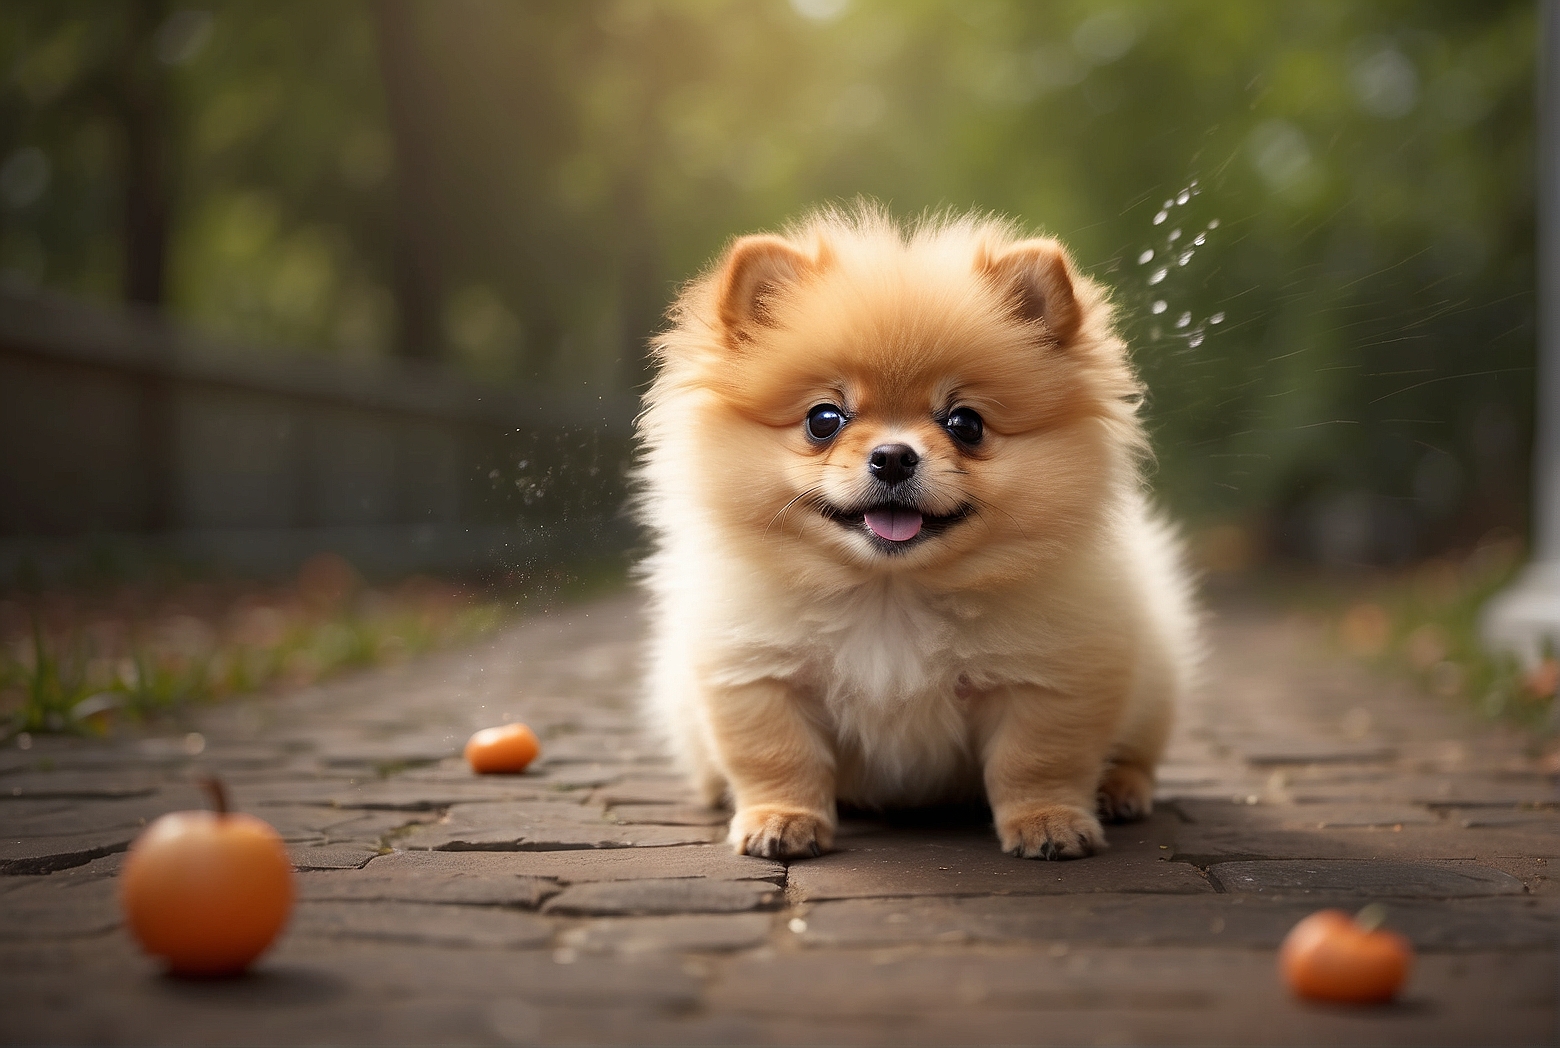 Effective Methods to Stop Pomeranian Puppies from Biting